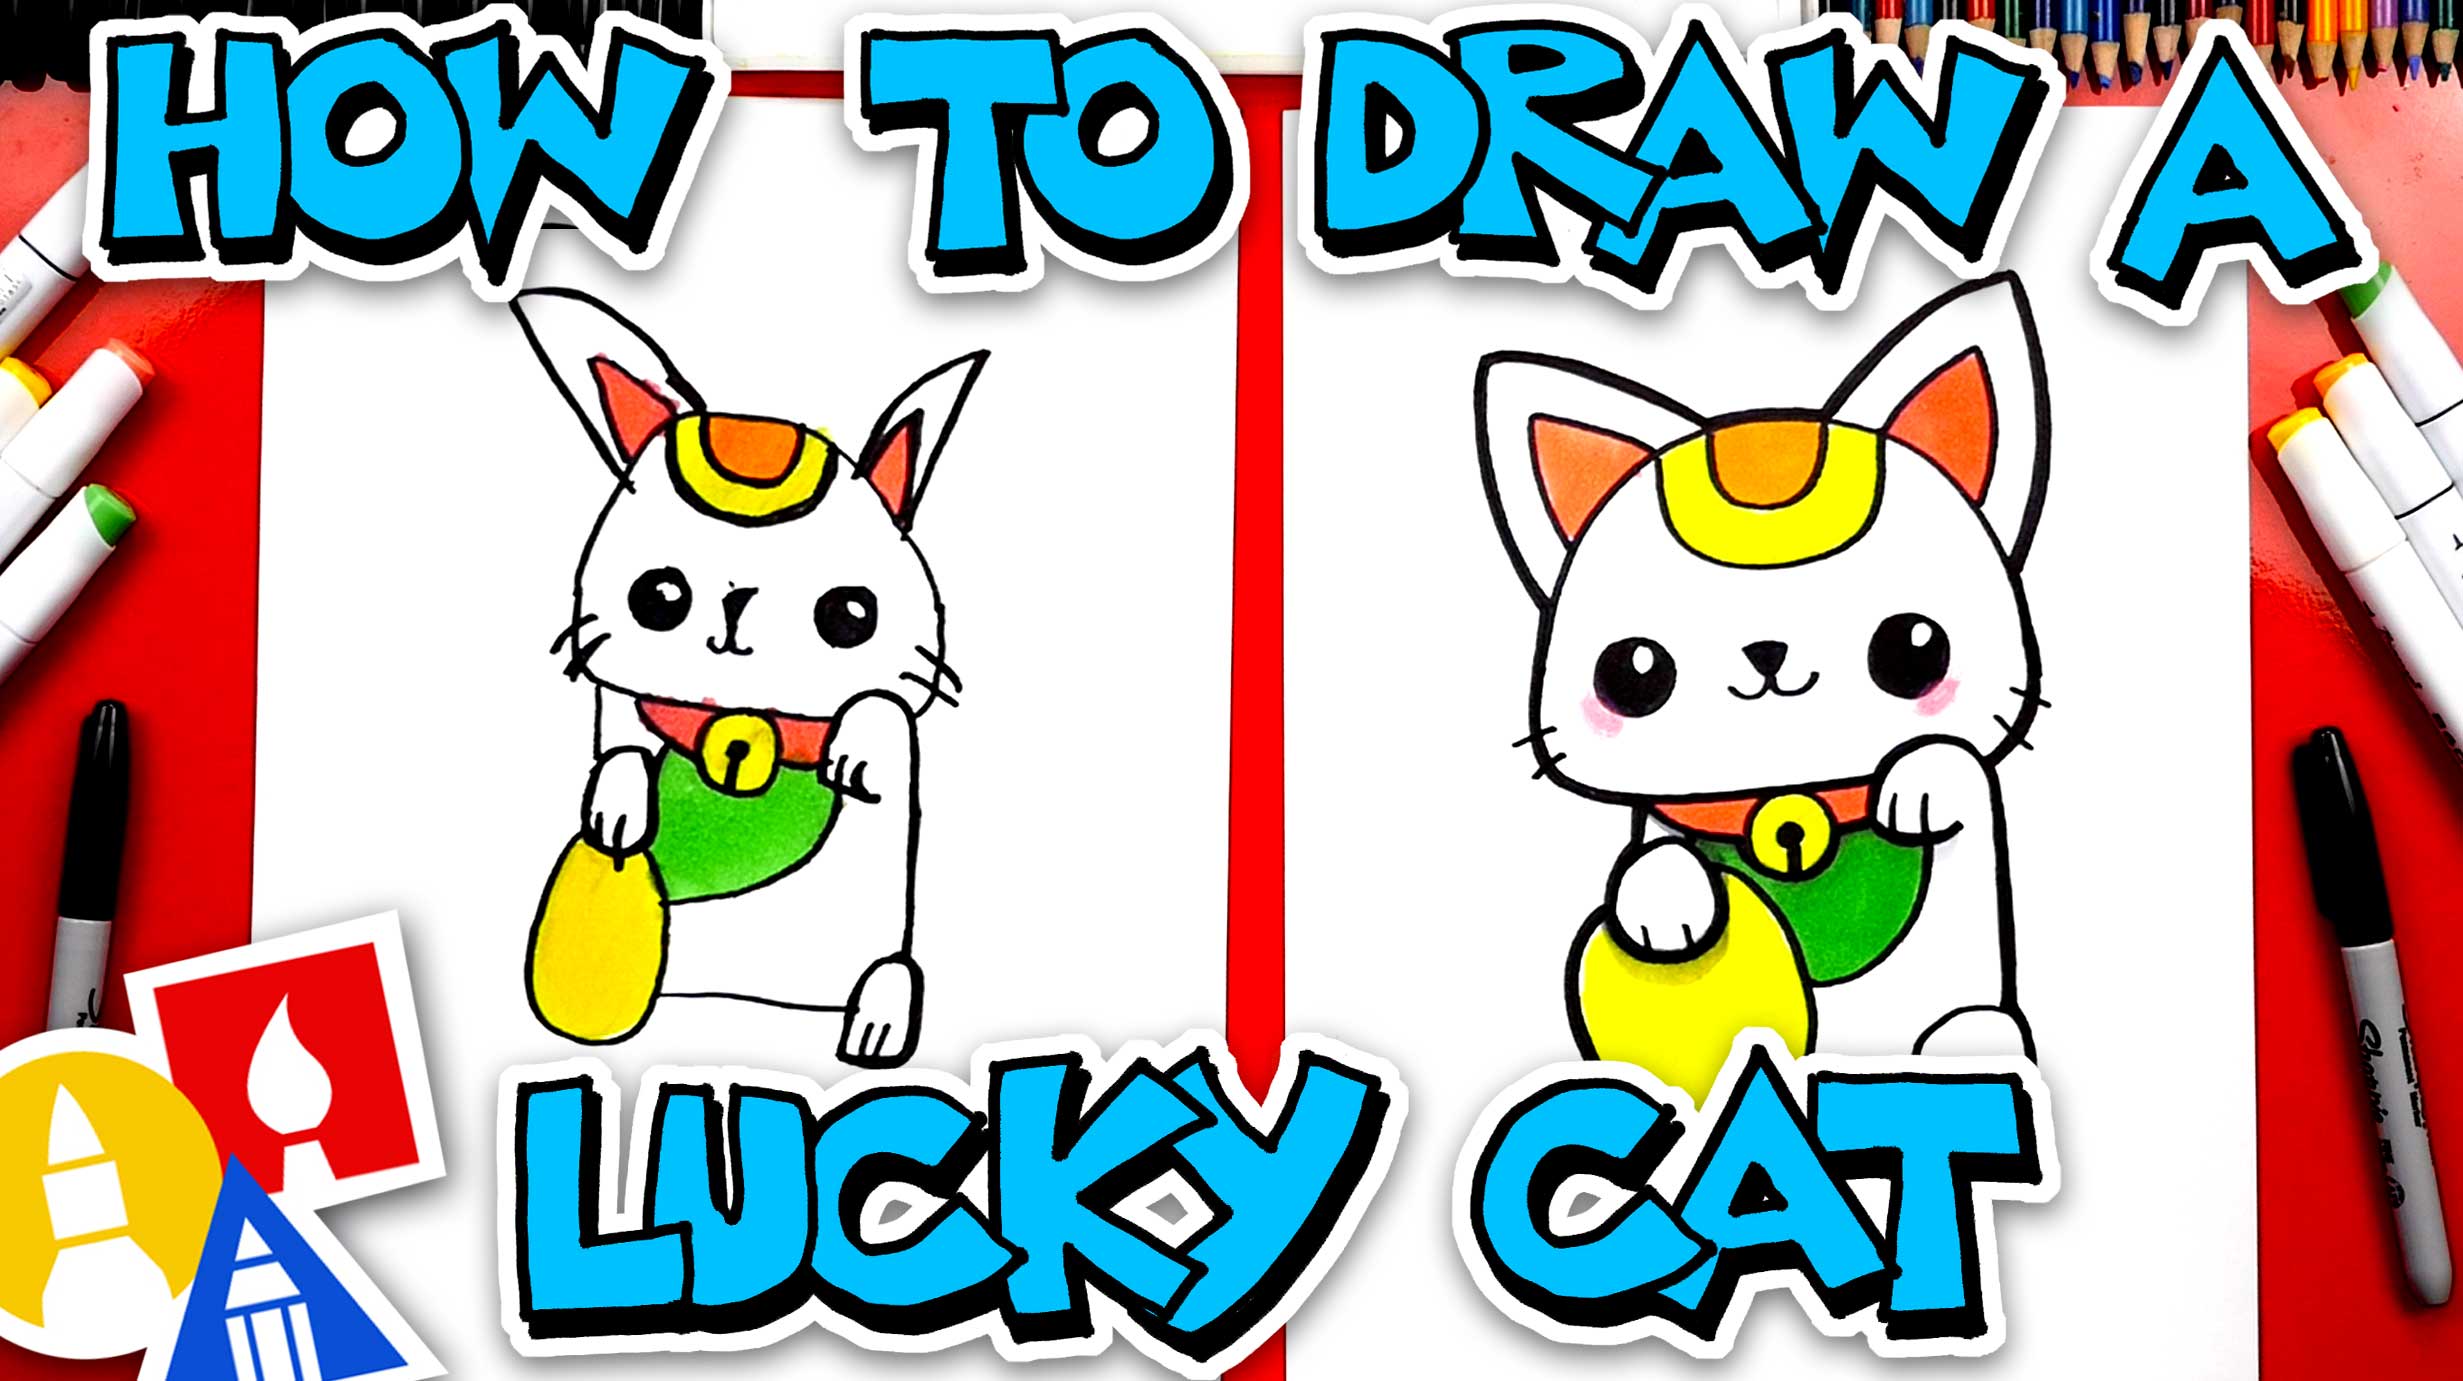 How To Draw A Lucky Cat